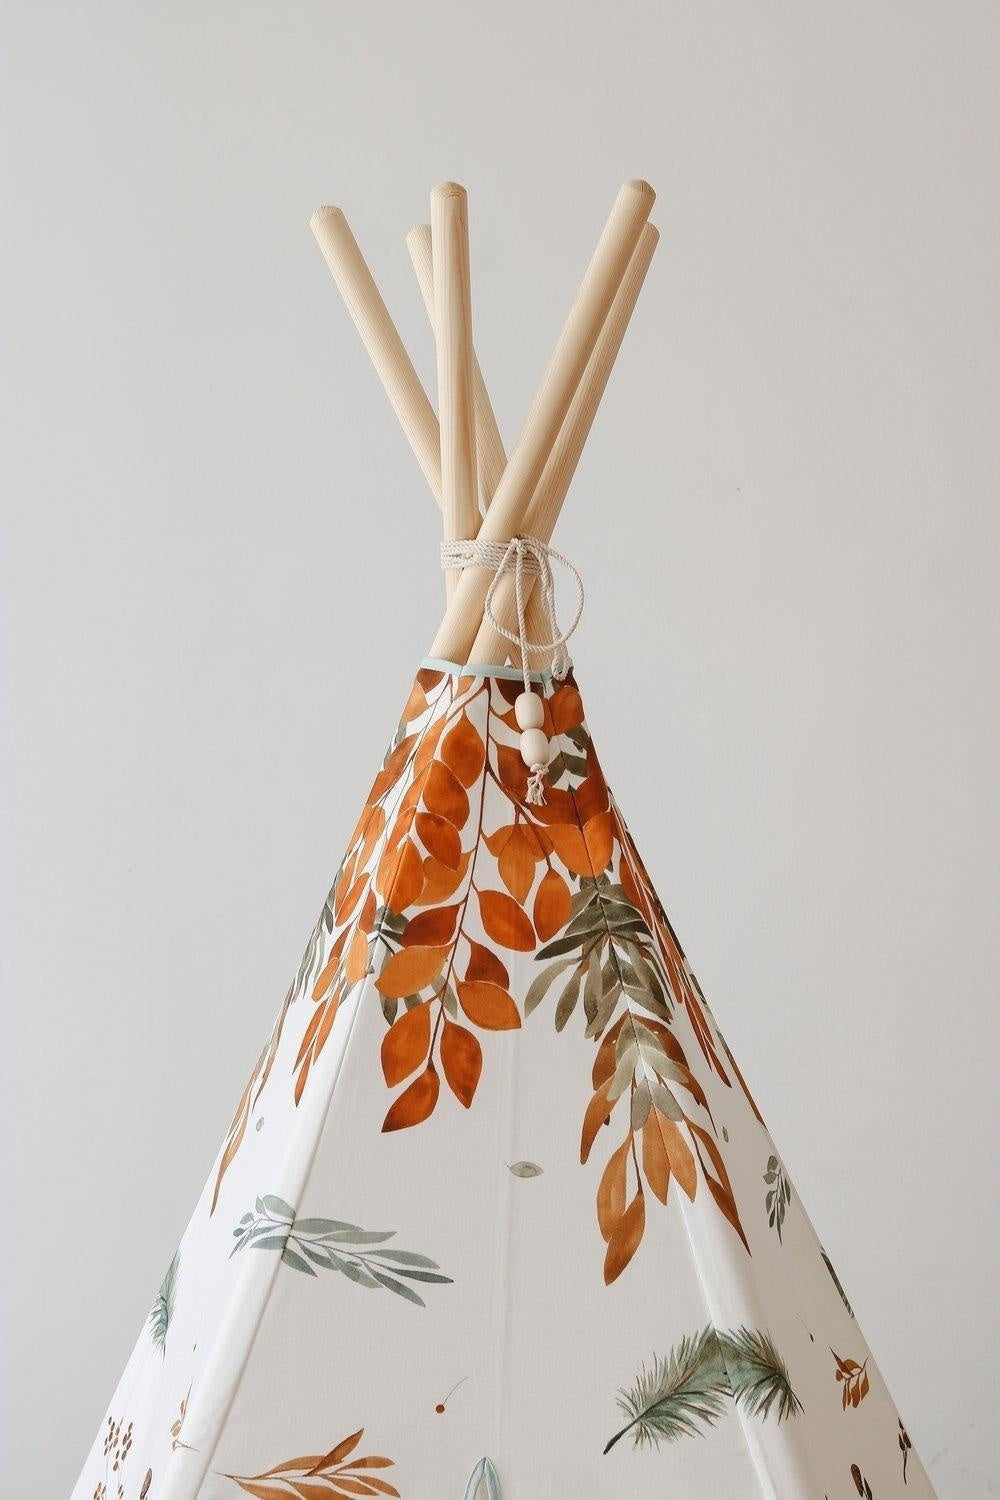 “Forest Friends” Teepee and Round Mat Set